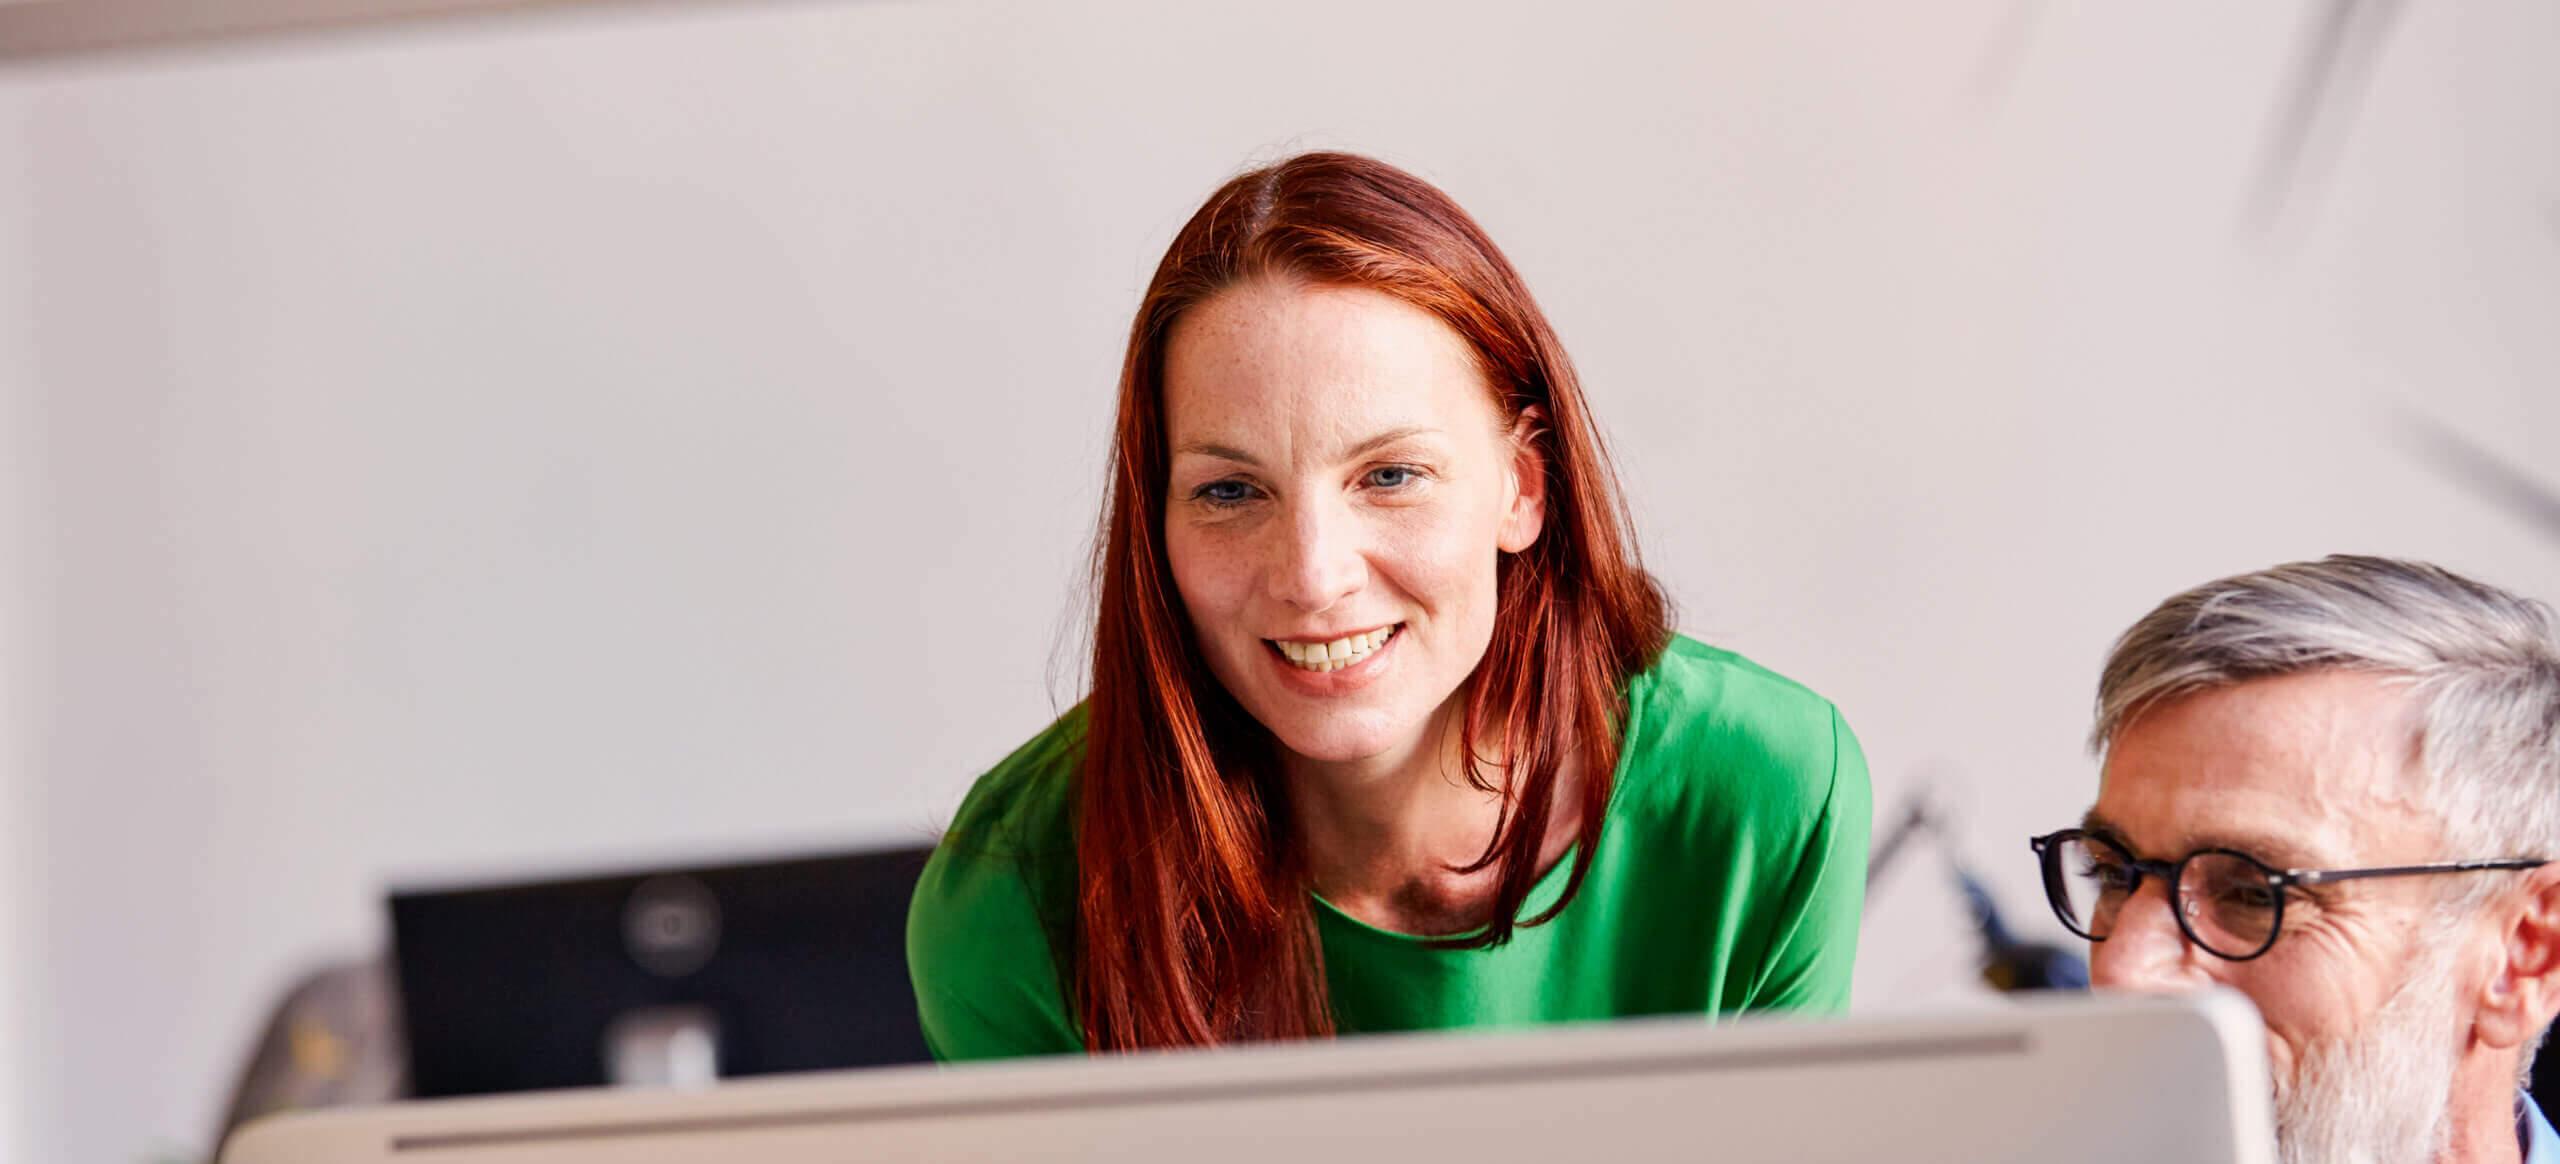 This is an image of a woman looking at a computer screen with a colleague and smiling. This is meant to represent someone who is happy about their medical claims process.